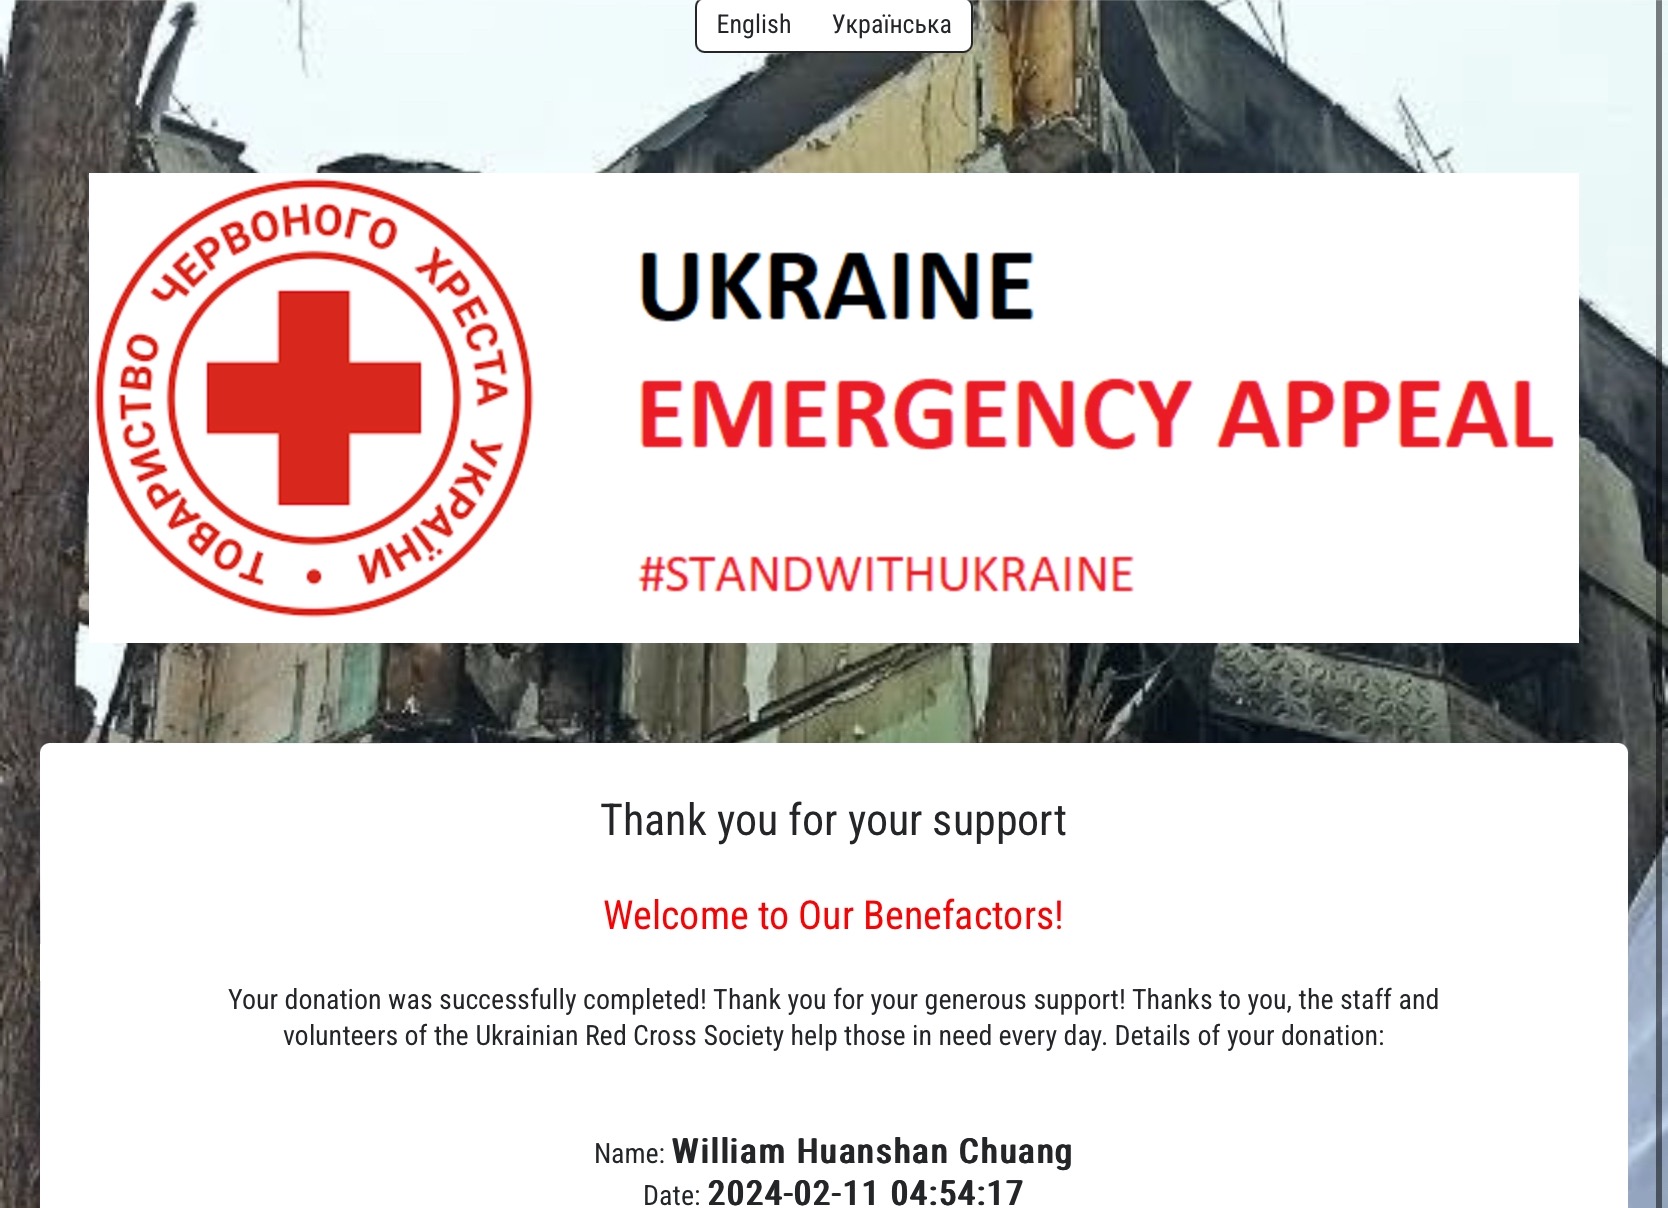 Join-William-Chuang-to-support-Ukraine-Red-Cross.jpeg